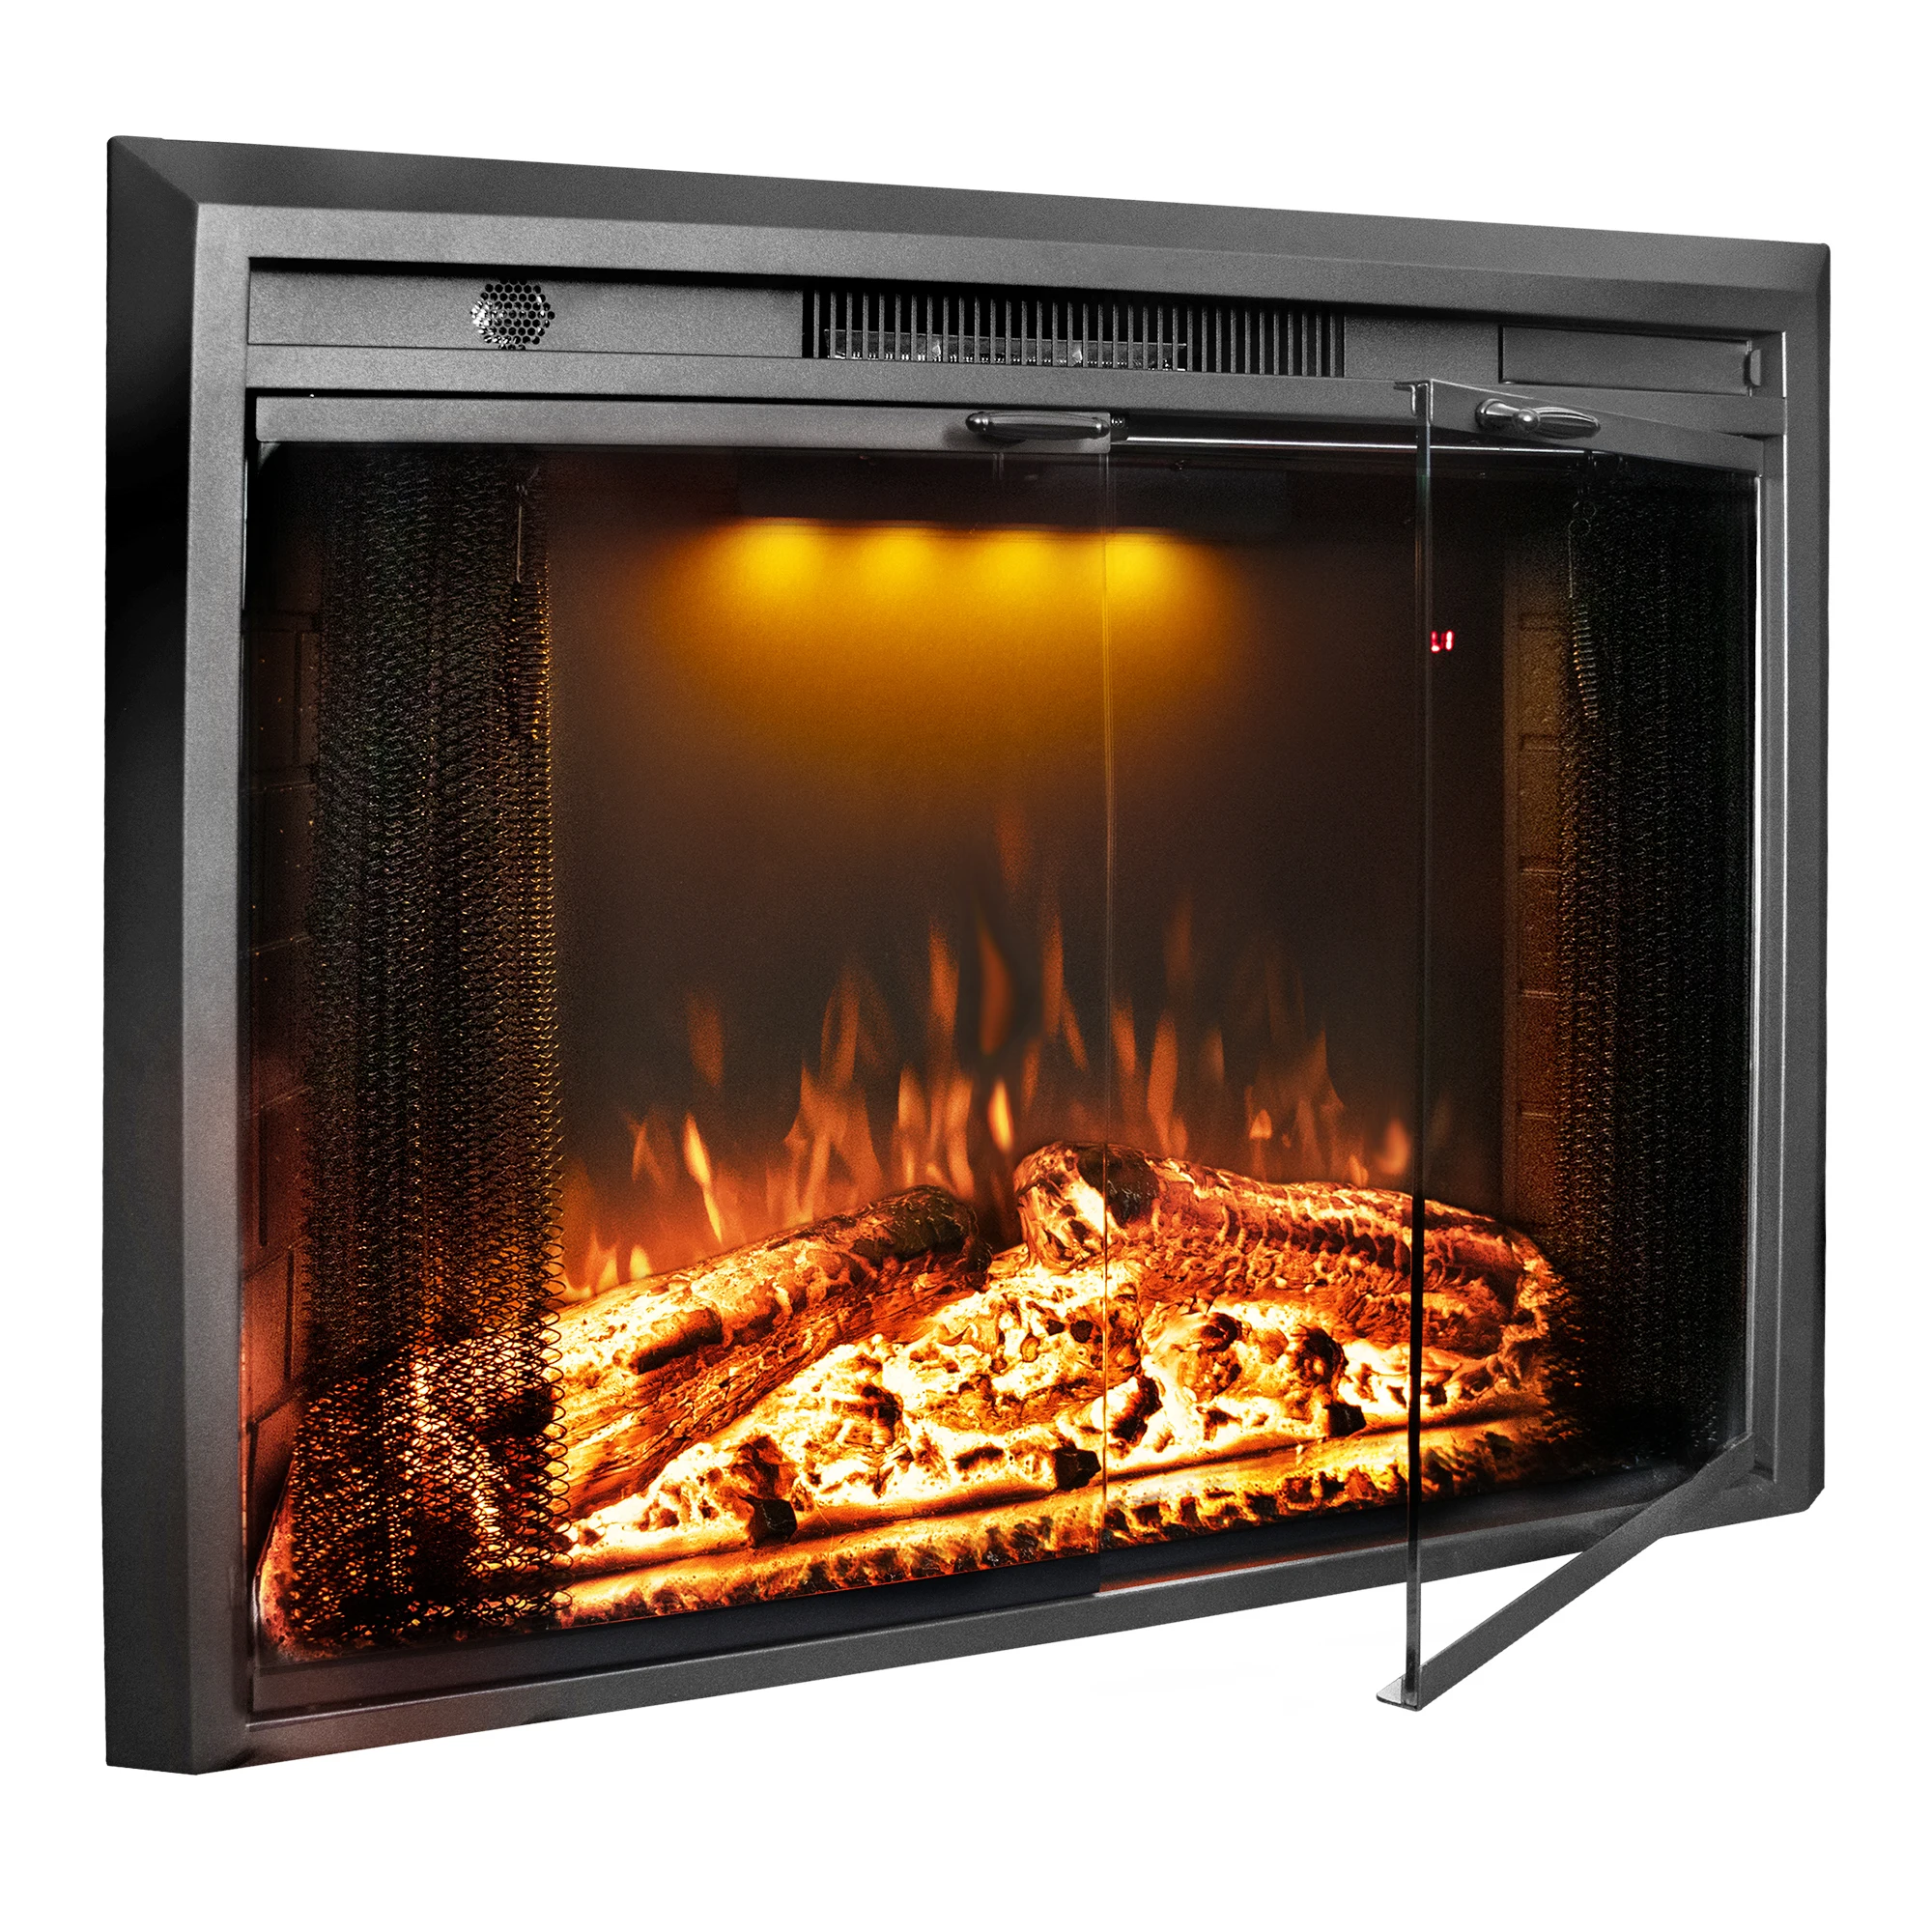 Luxstar 26 Inch LED Screen Three Colors Log  Flame Insert Electric Fireplace  with Top Led Light Timer  Remote Control Indoor